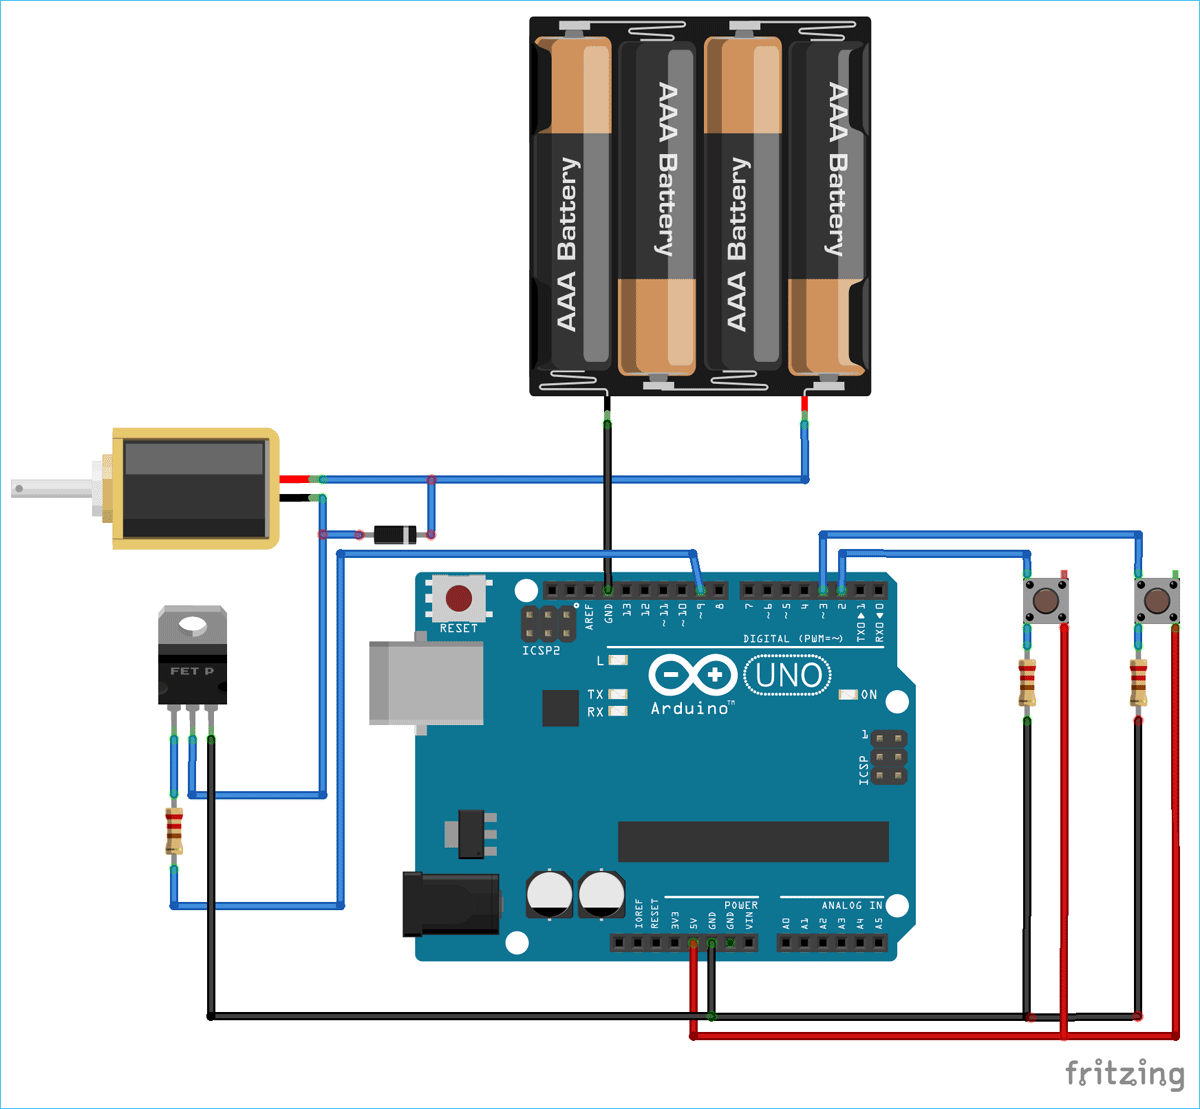 How to control a Solenoid Valve with Arduino